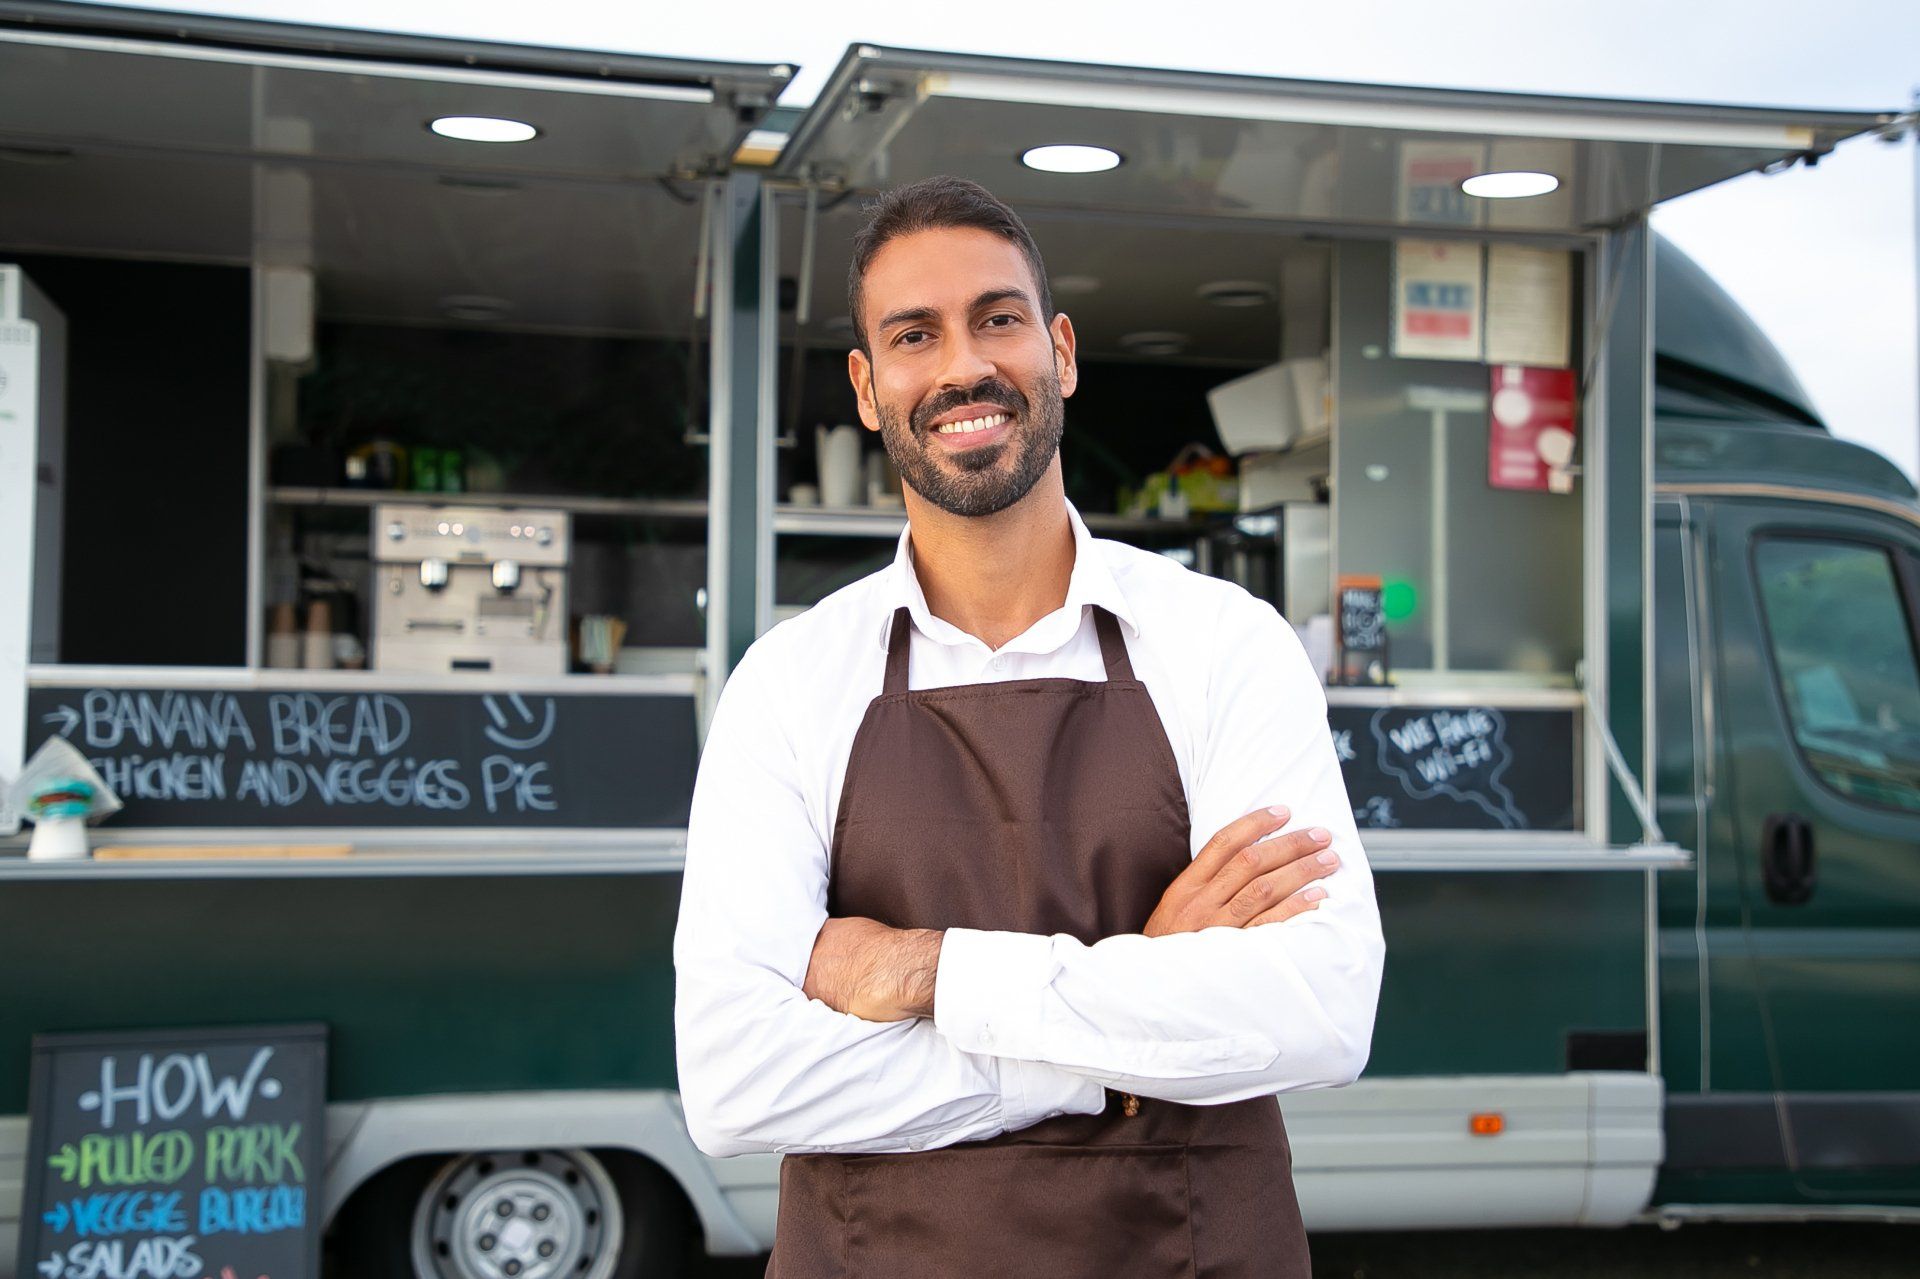 A man is standing in front of a food truck with his arms crossed.